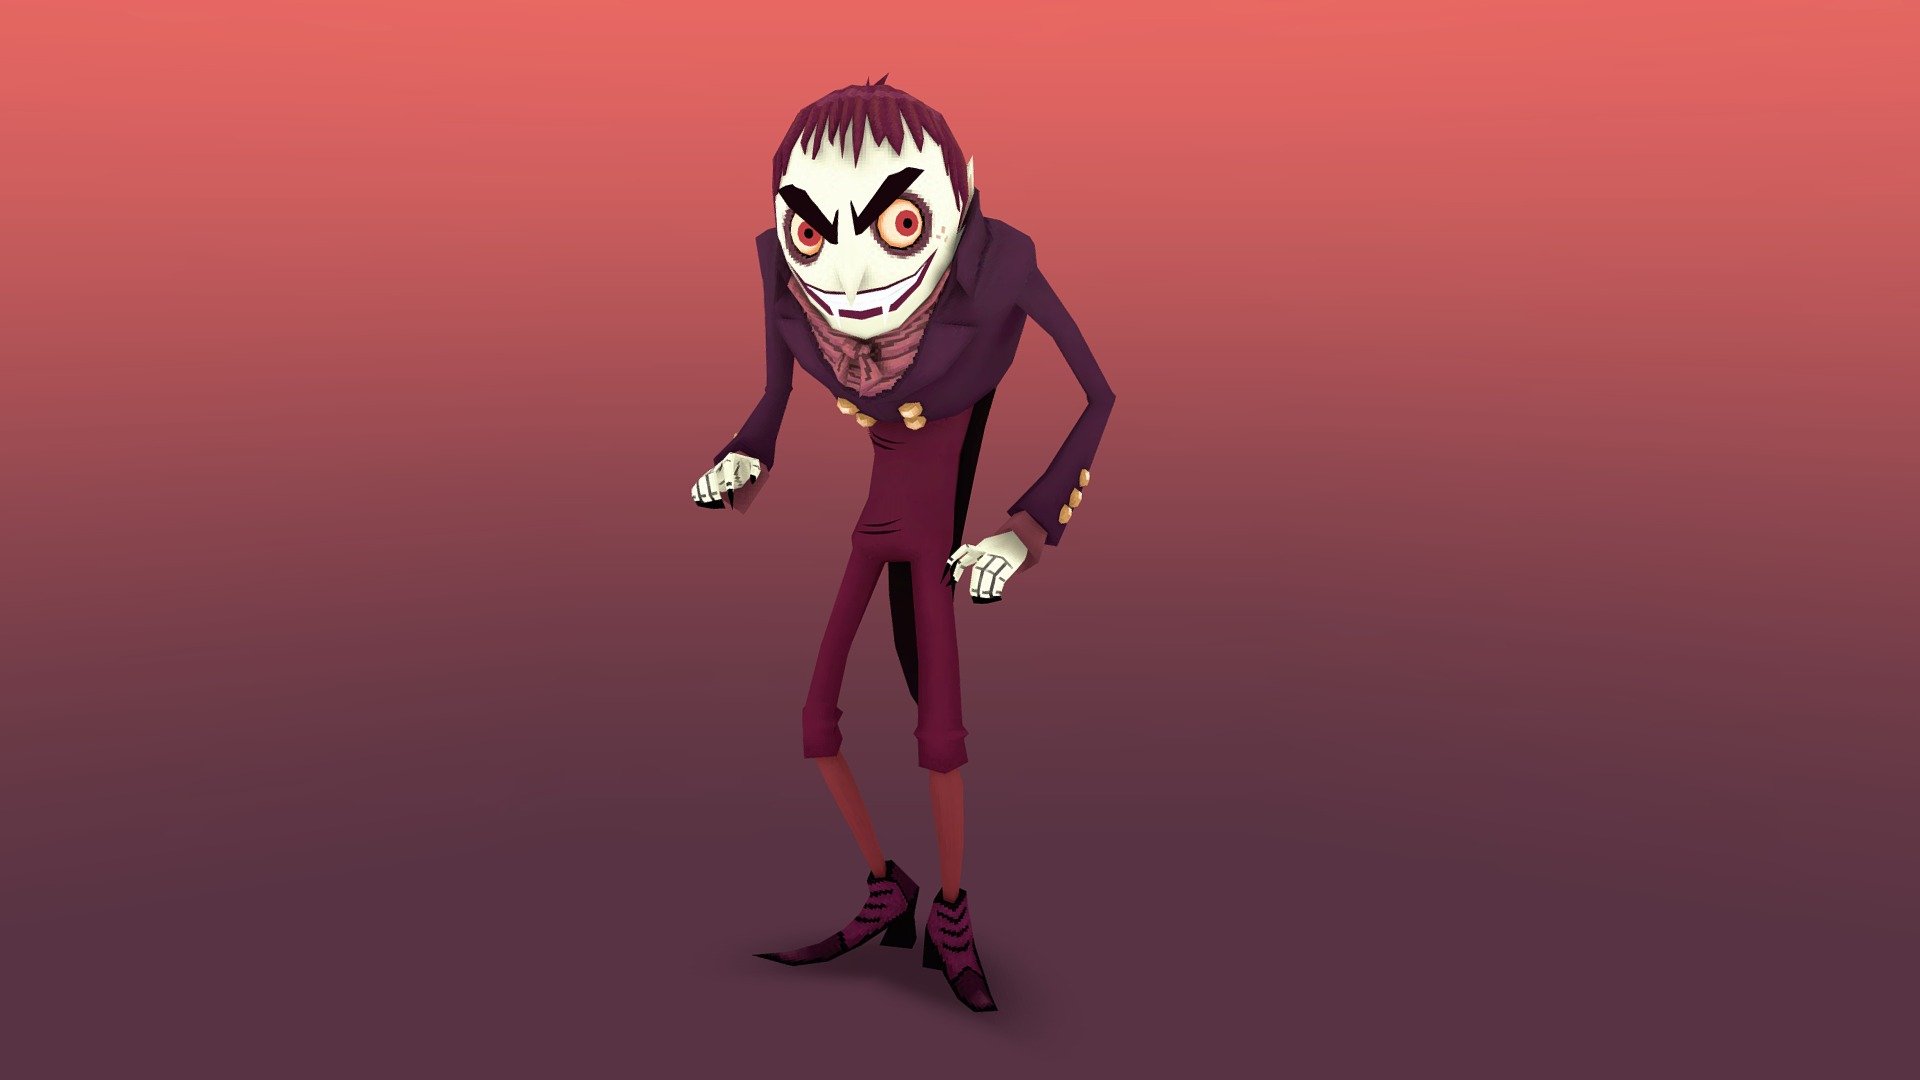 While animating on Hotel Transylvania: The Series(Season 2), I was inspired by the fun character designs to make a few in 3D 3d model